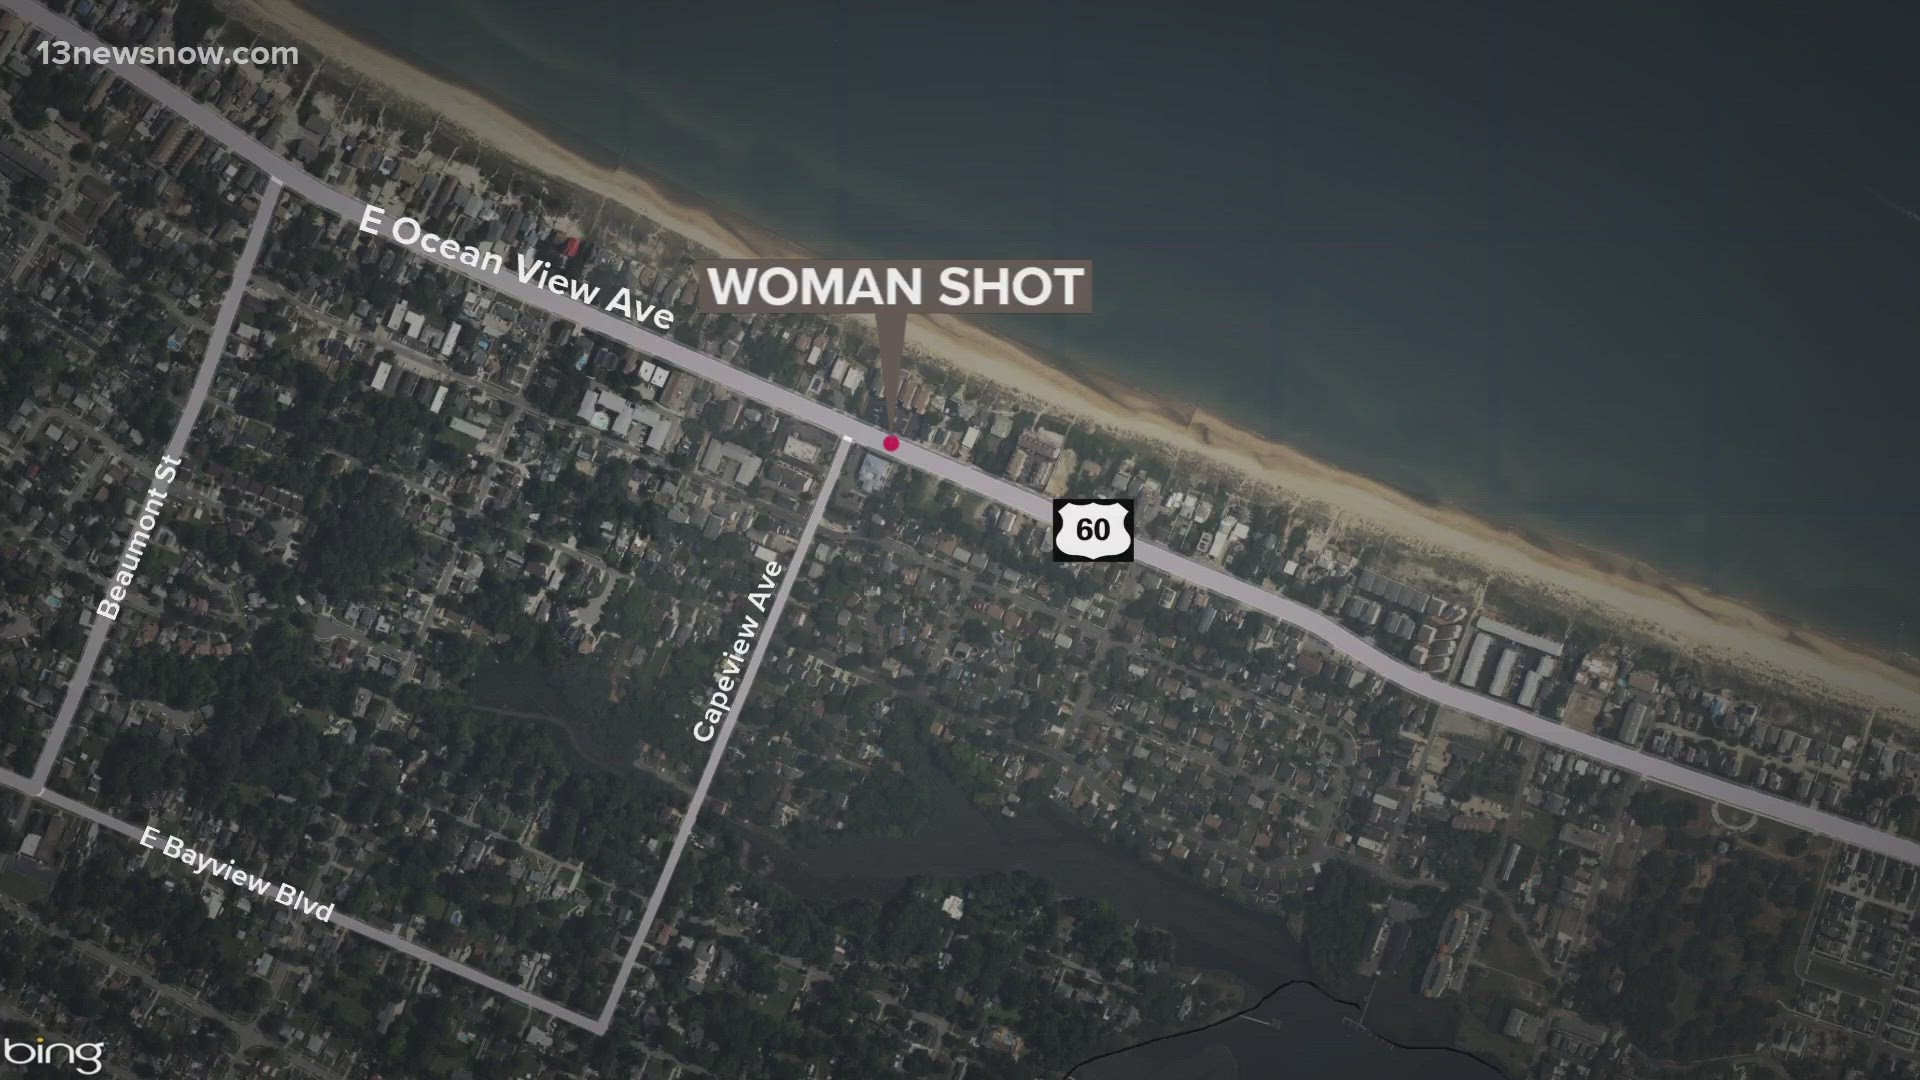 A woman is dead after a shooting in the Ocean View area of Norfolk that happened early Sunday morning, police said.